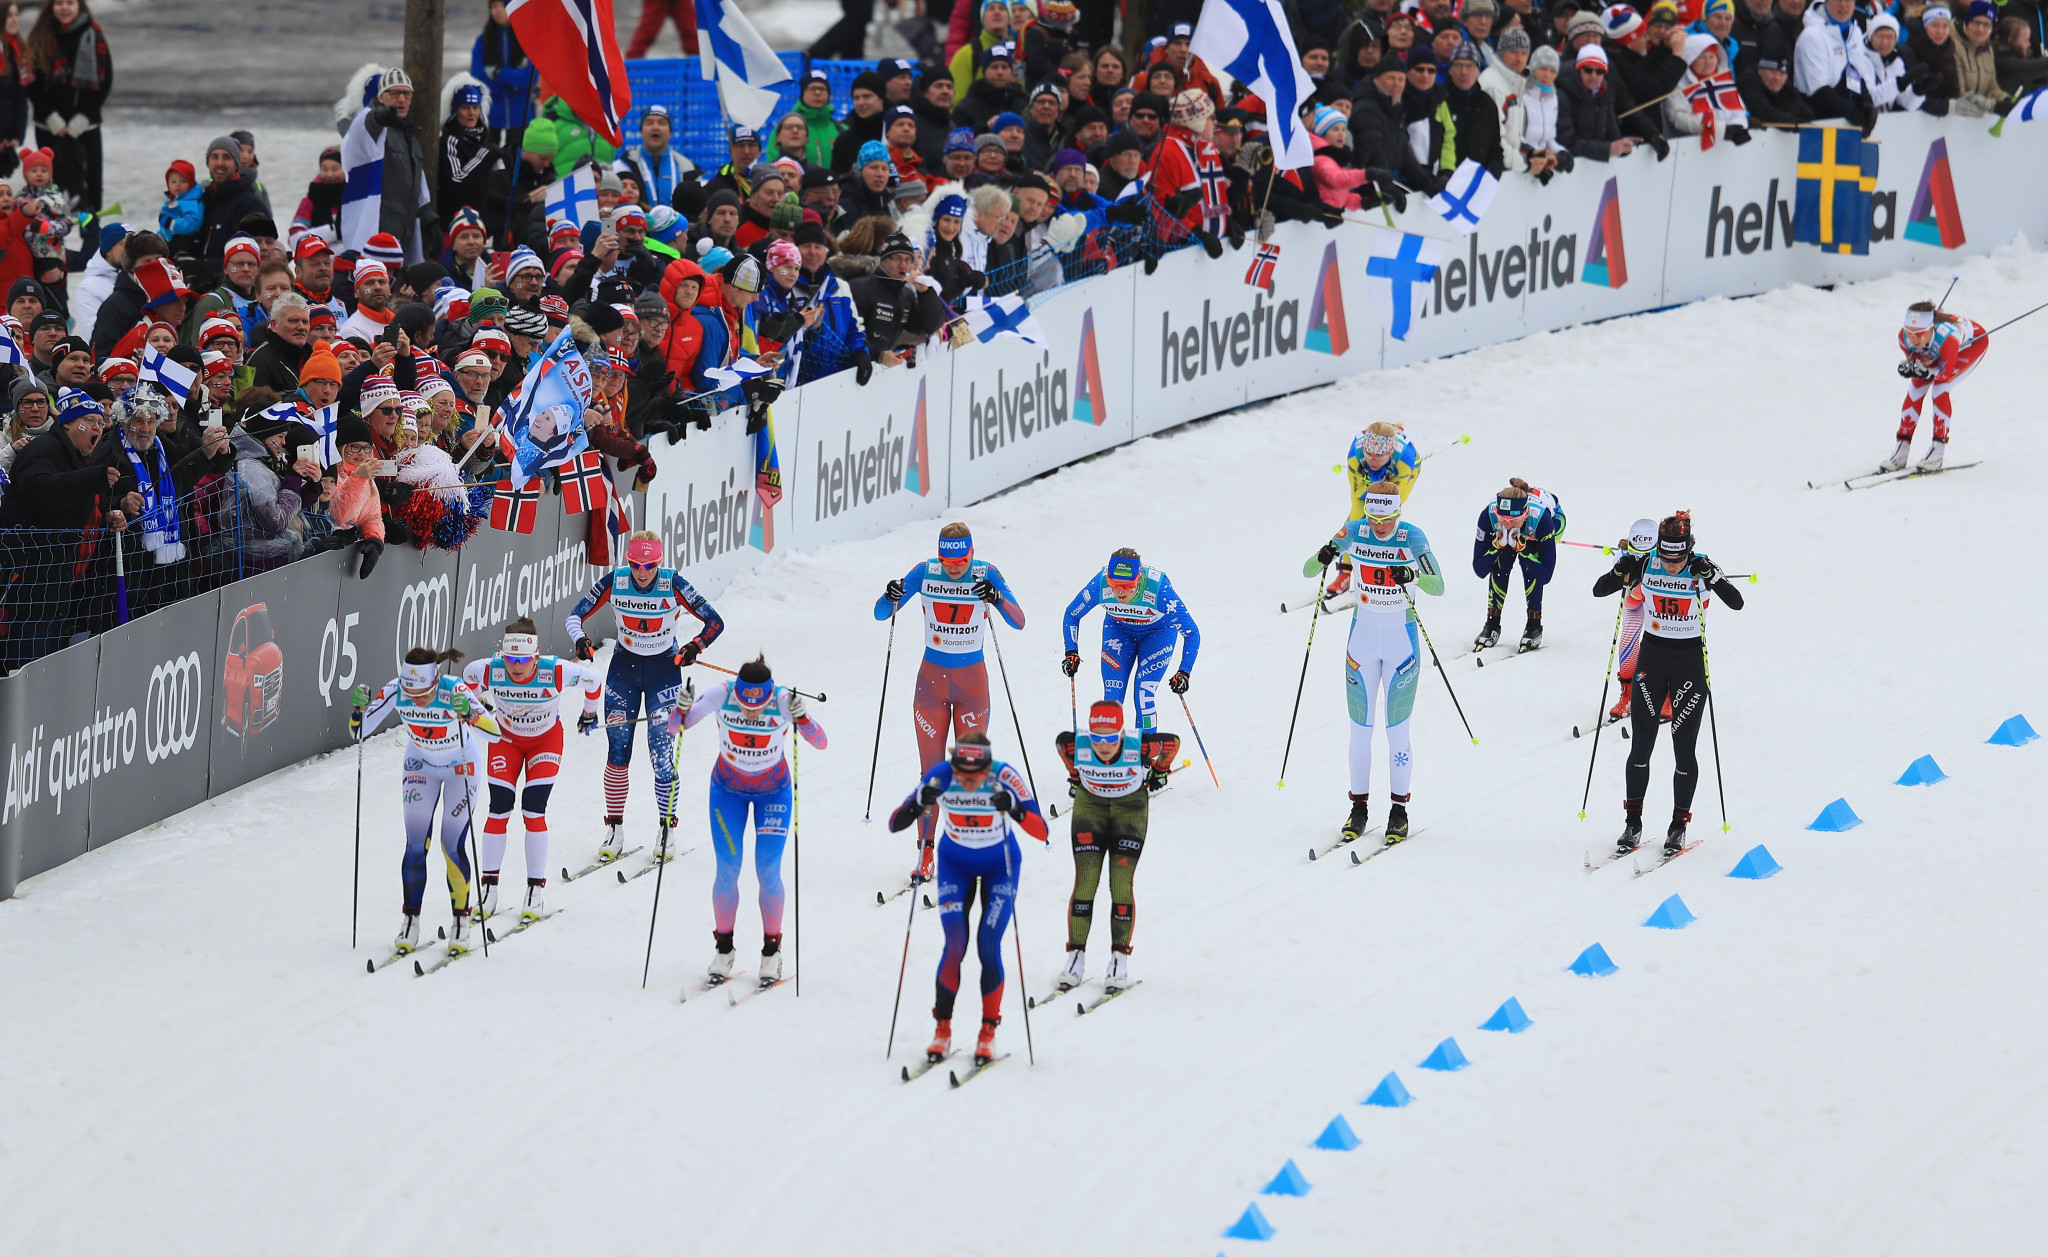 Viessmann have been named as the main sponsor for the 2019 FIS Nordic World Ski Championships ©Getty Images